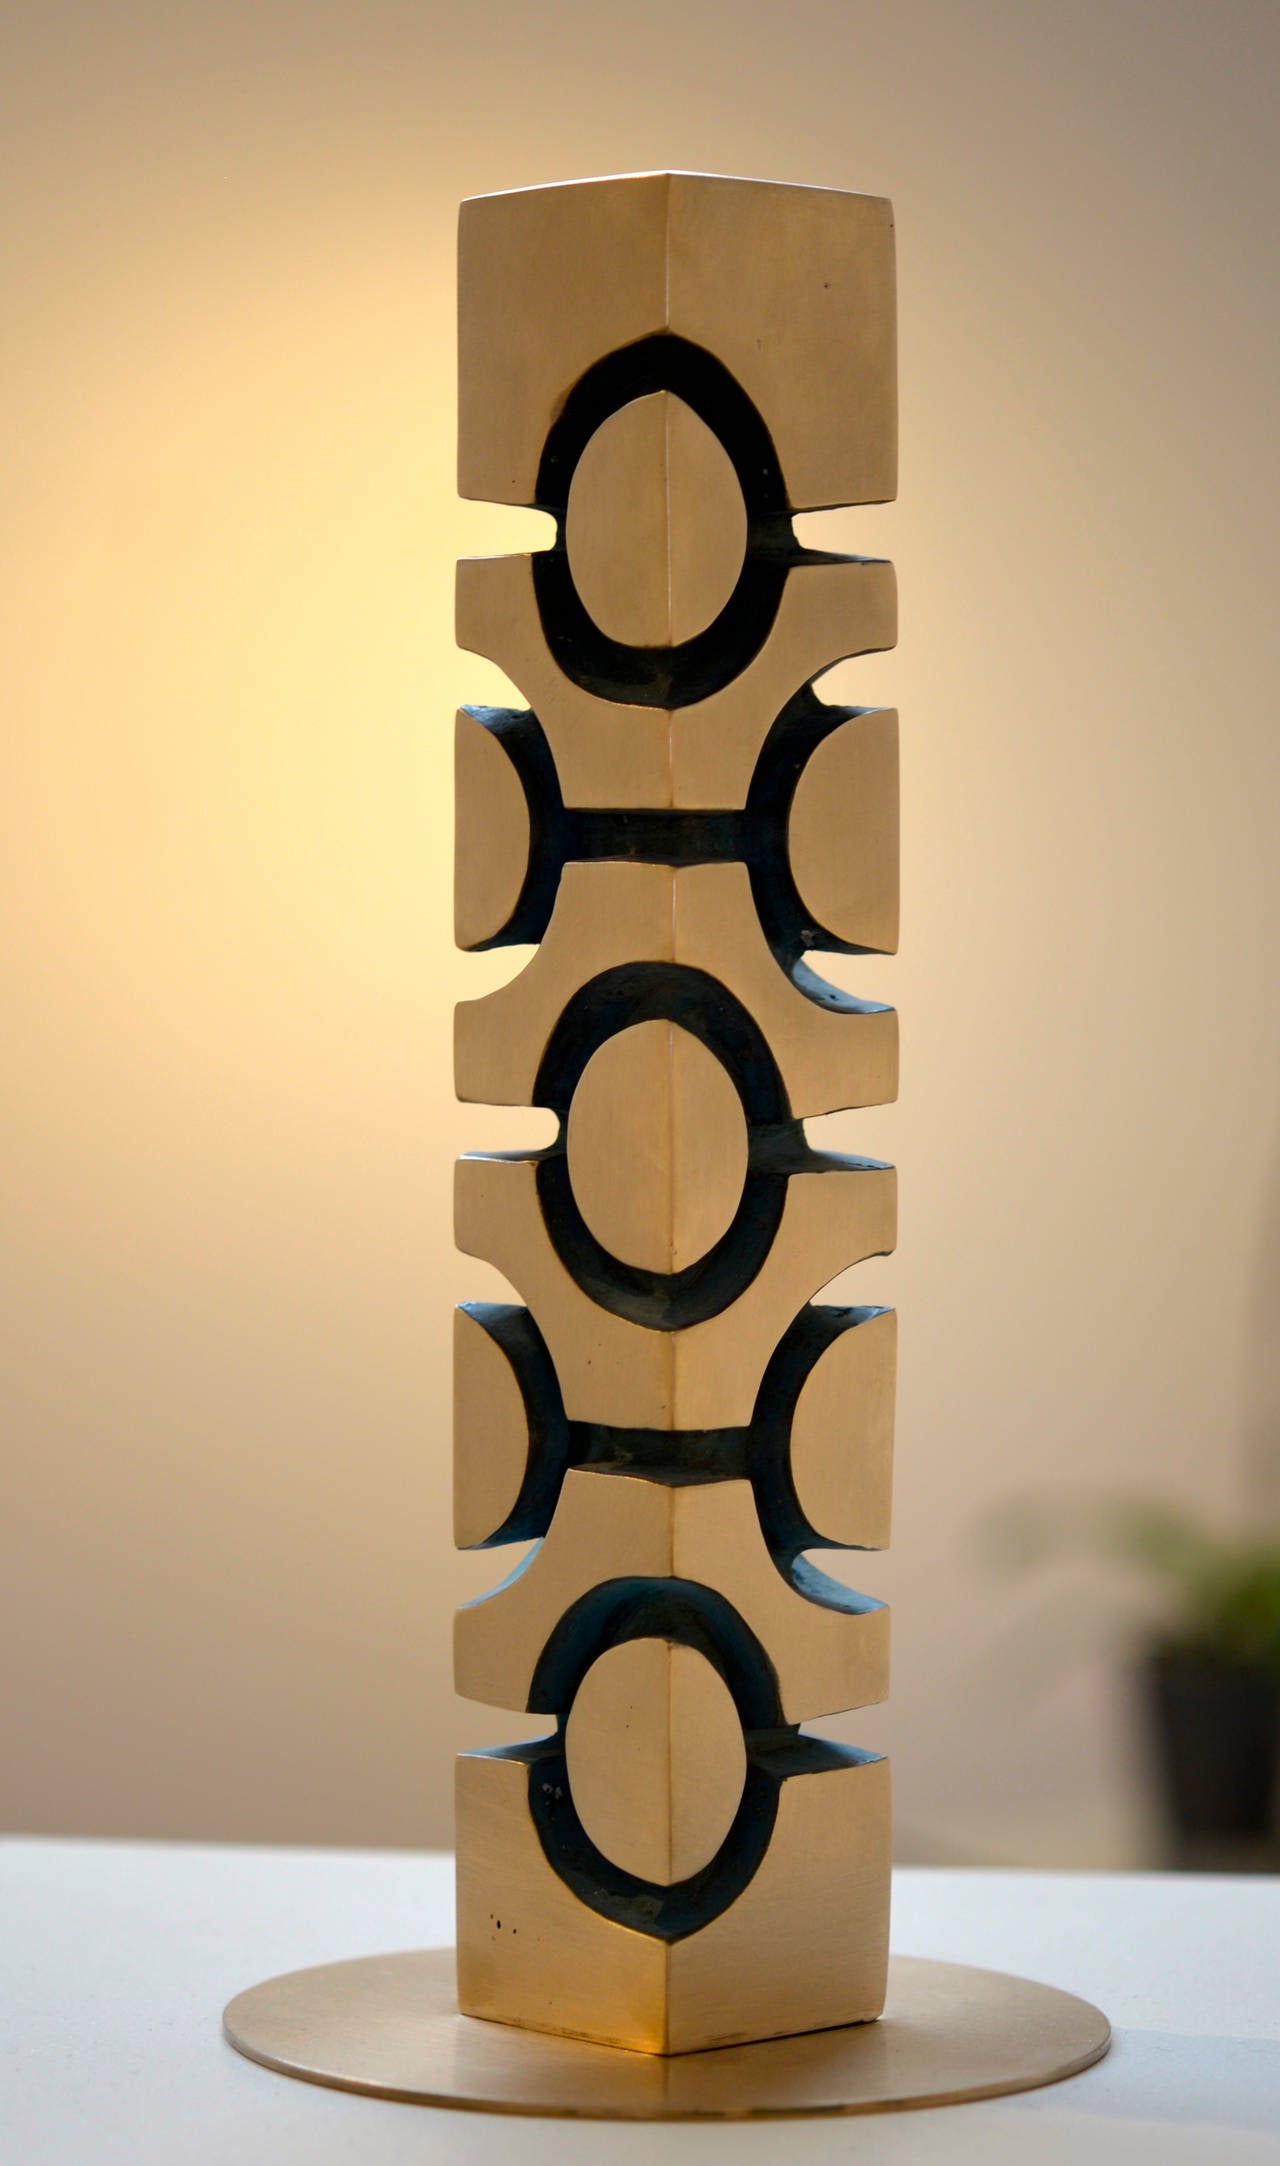 Nathaniel Hesse Abstract Sculpture - Totem - Endless